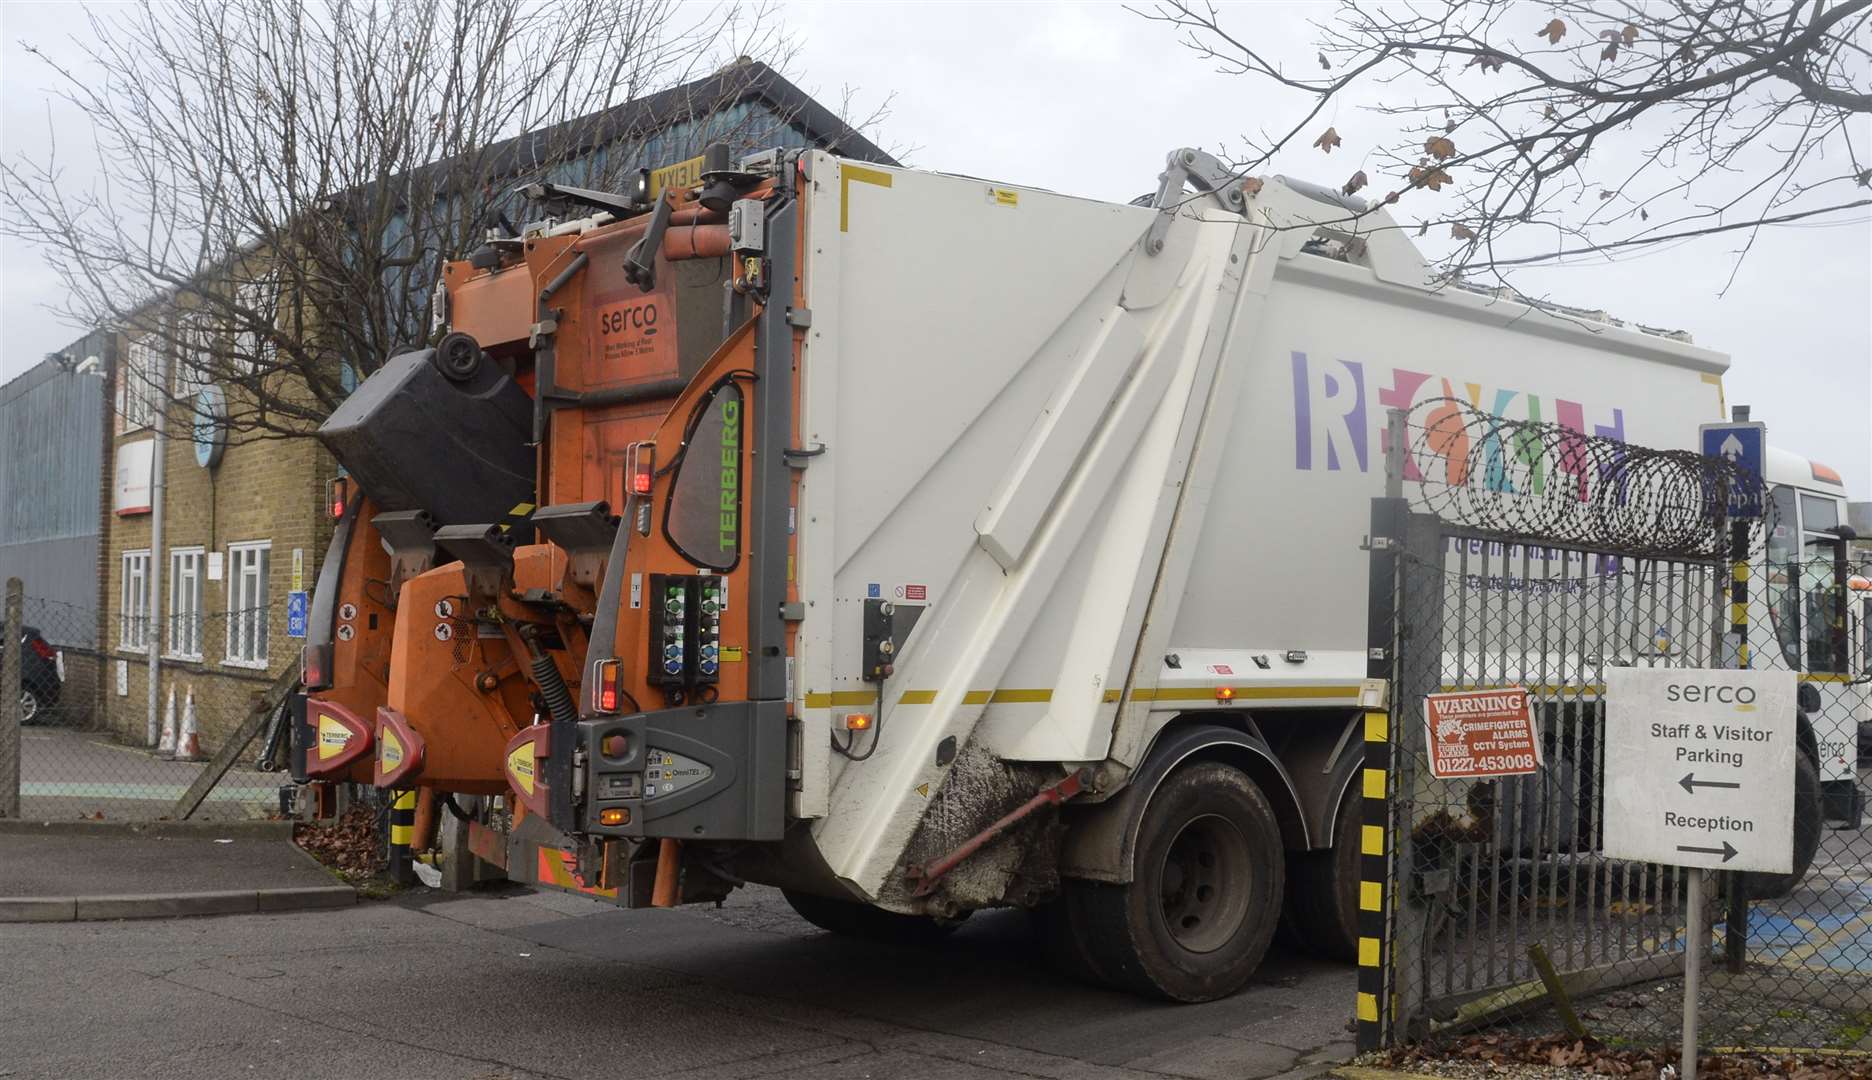 The bin fell into the back of a dustcart